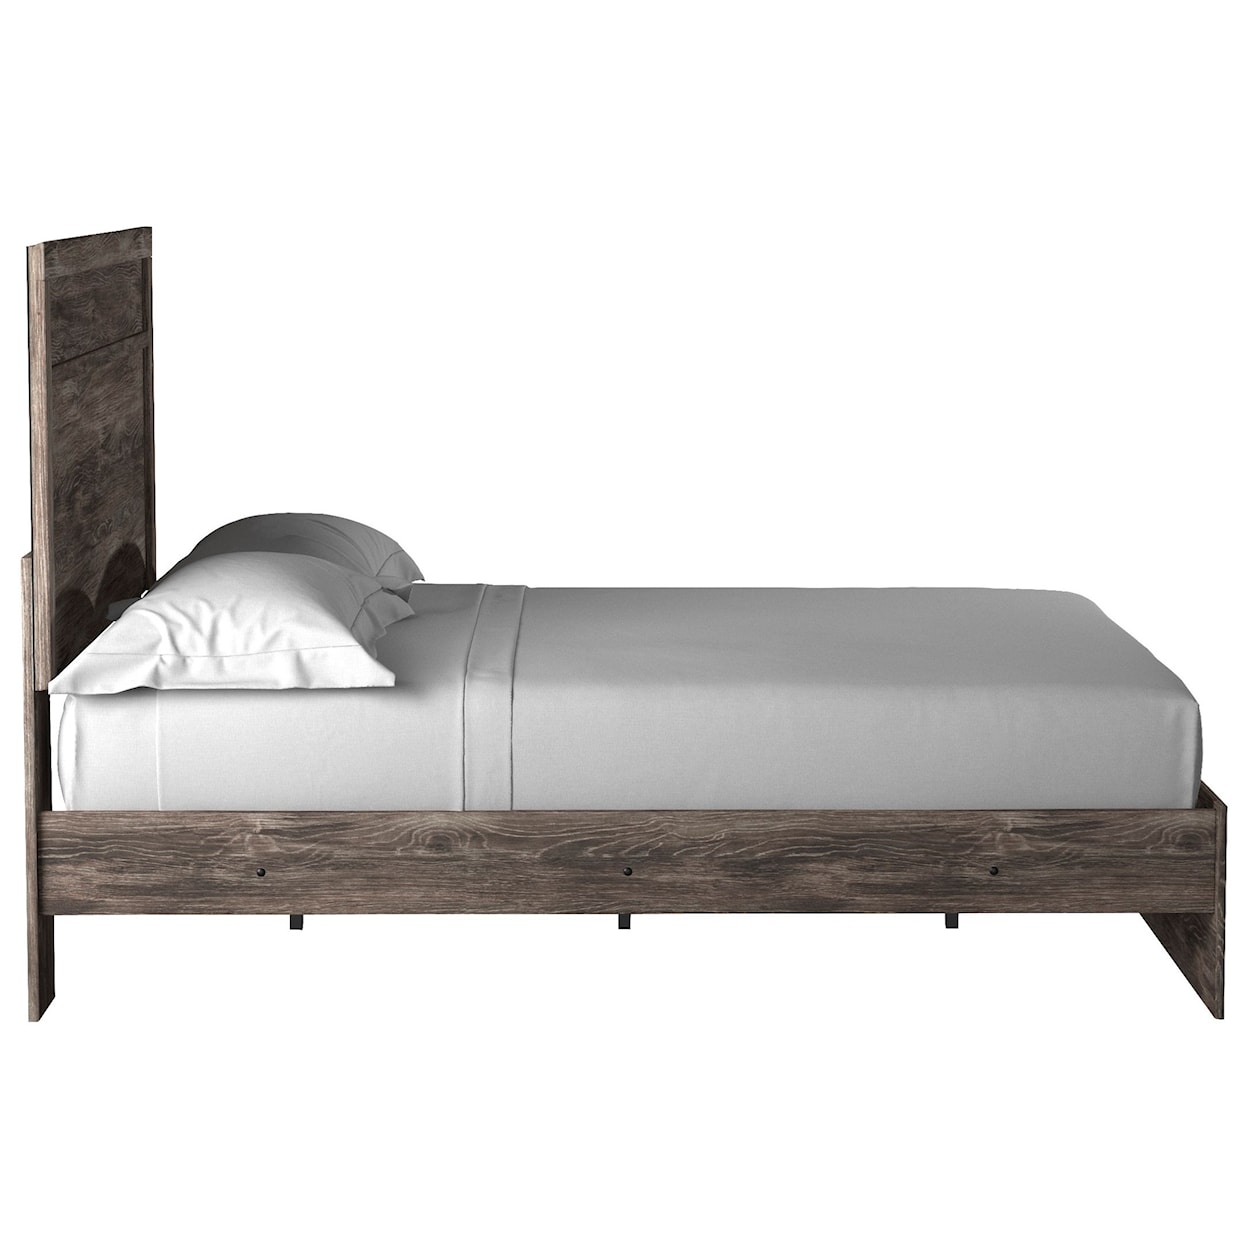 Signature Design by Ashley Ralinski Queen Panel Bed